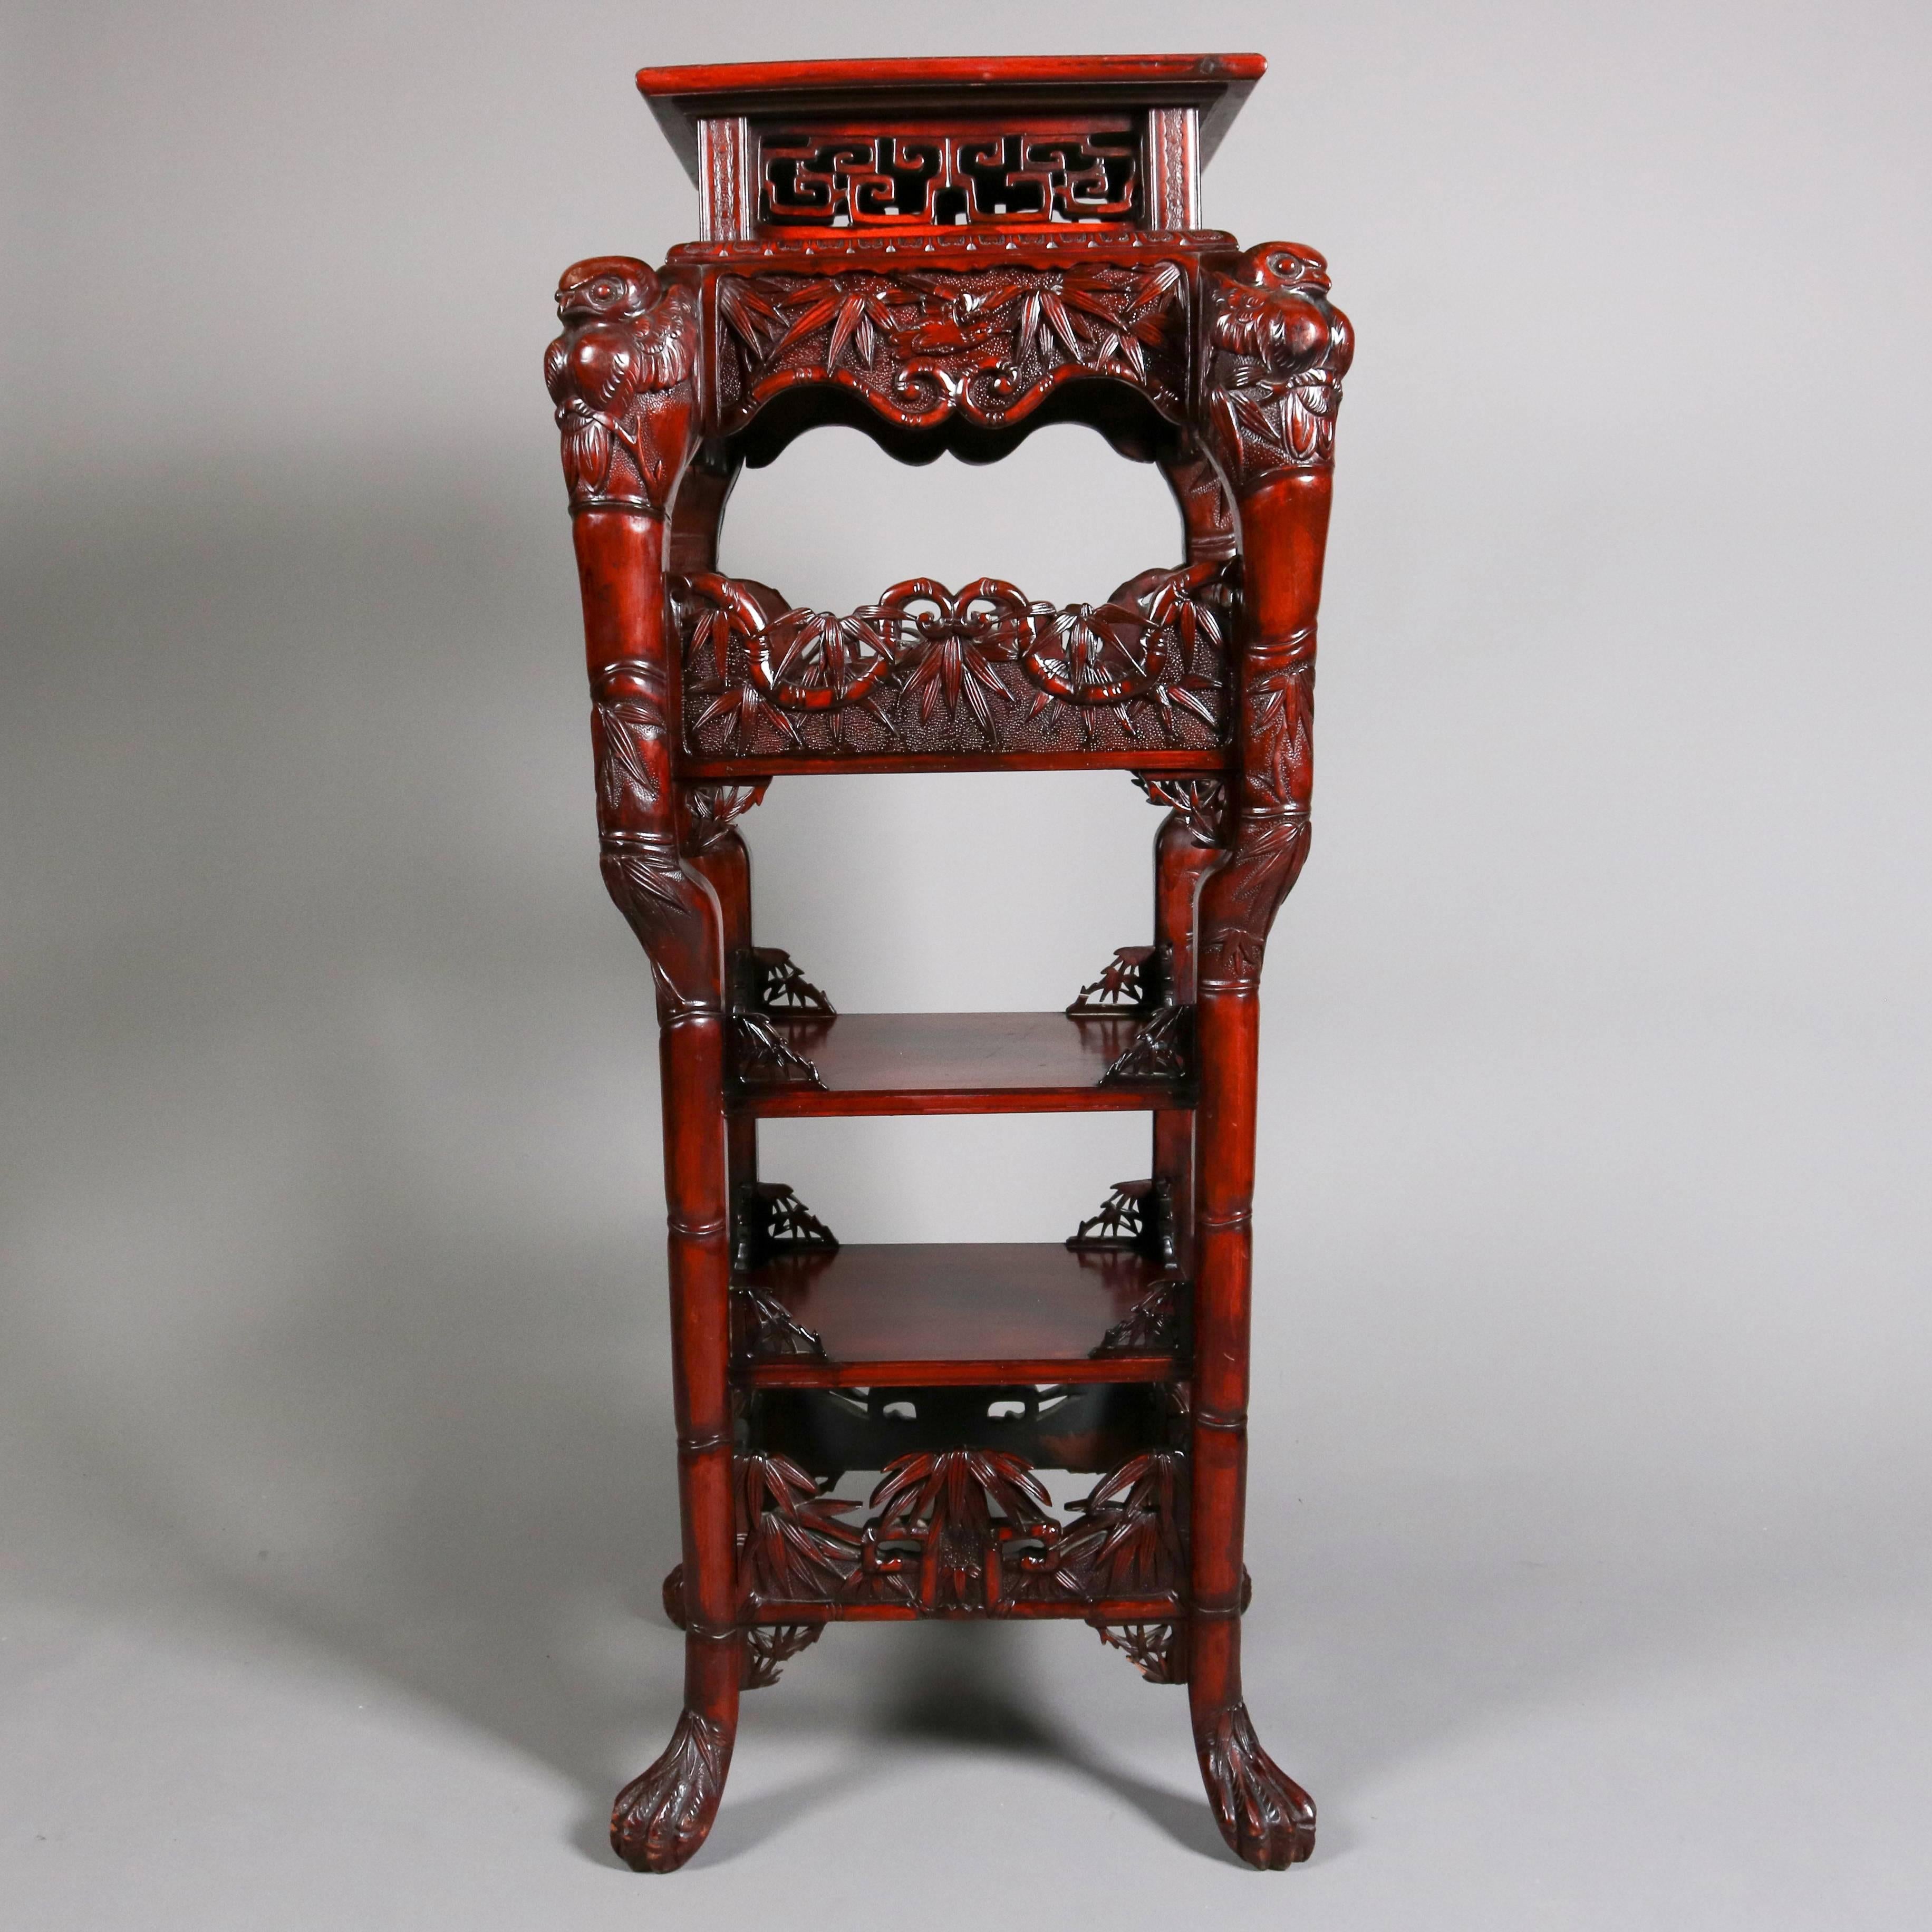 20th Century Antique Japanese Hand-Carved Hardwood Figural Owl Tiered Stand, circa 1900